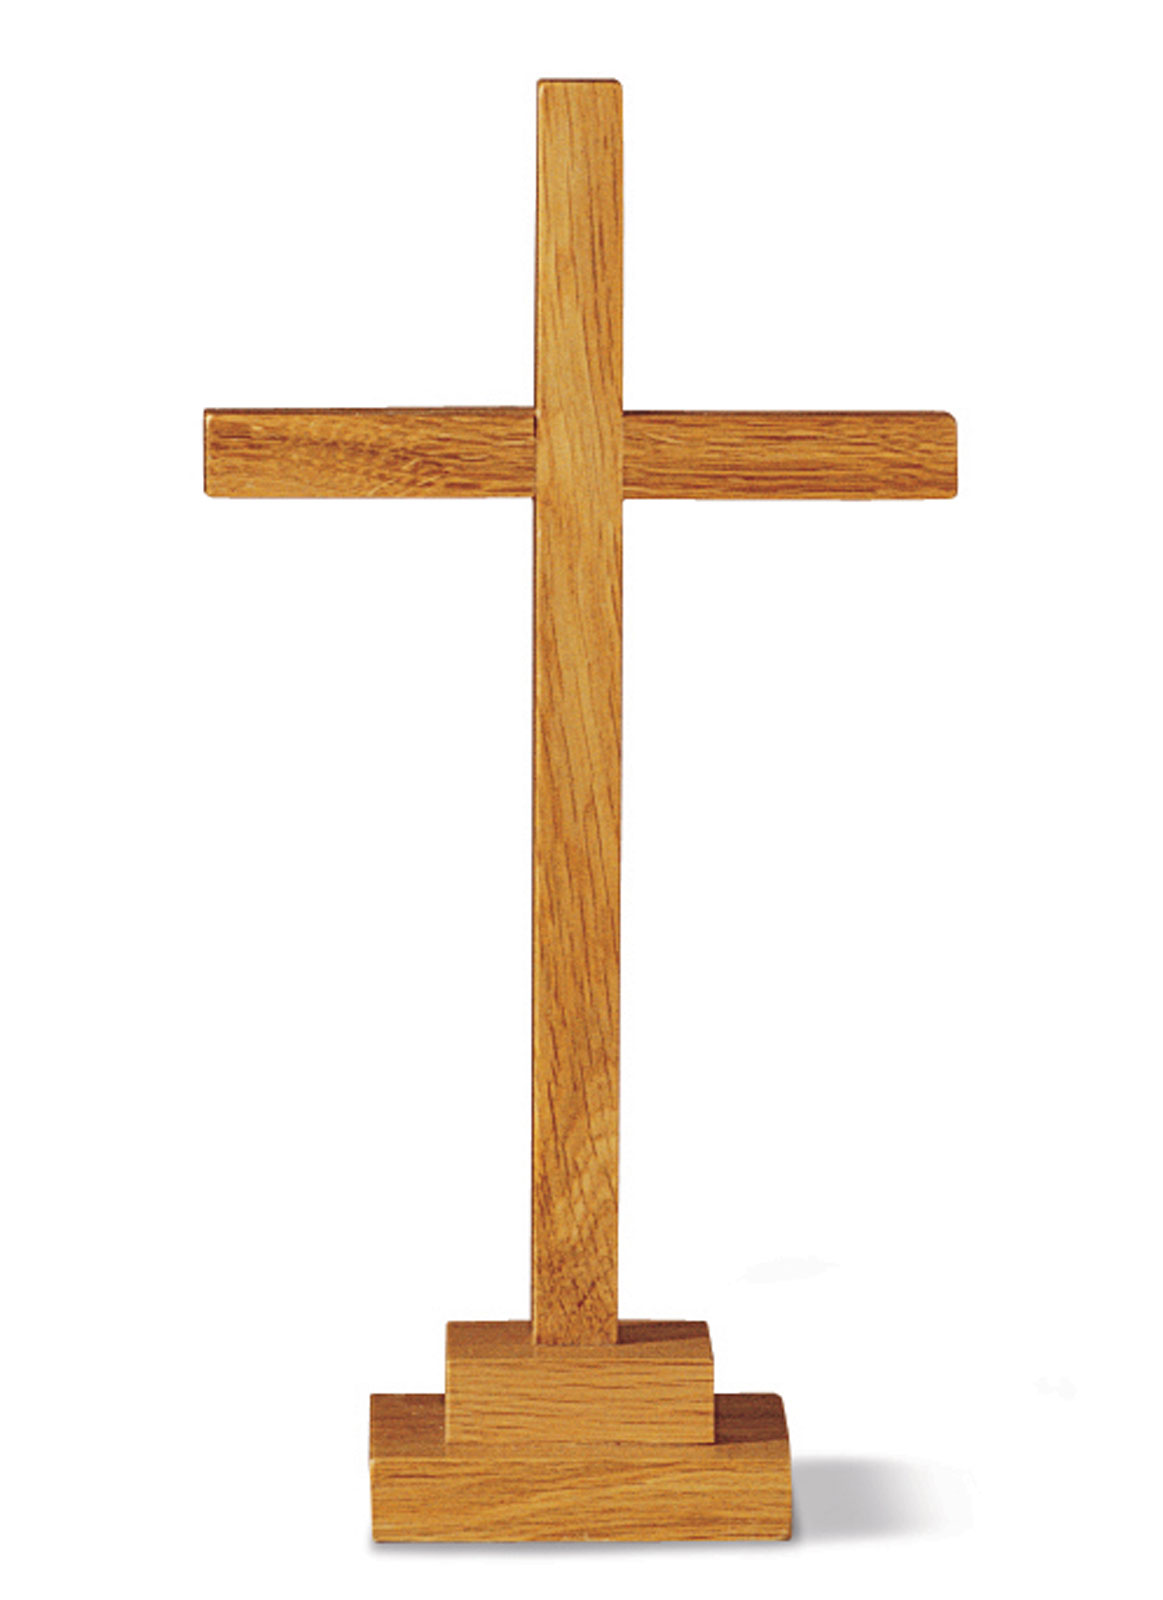 Standing Cross without Corpus | UK Church Supplies & Church Candles - Charles Farris1163 x 1600